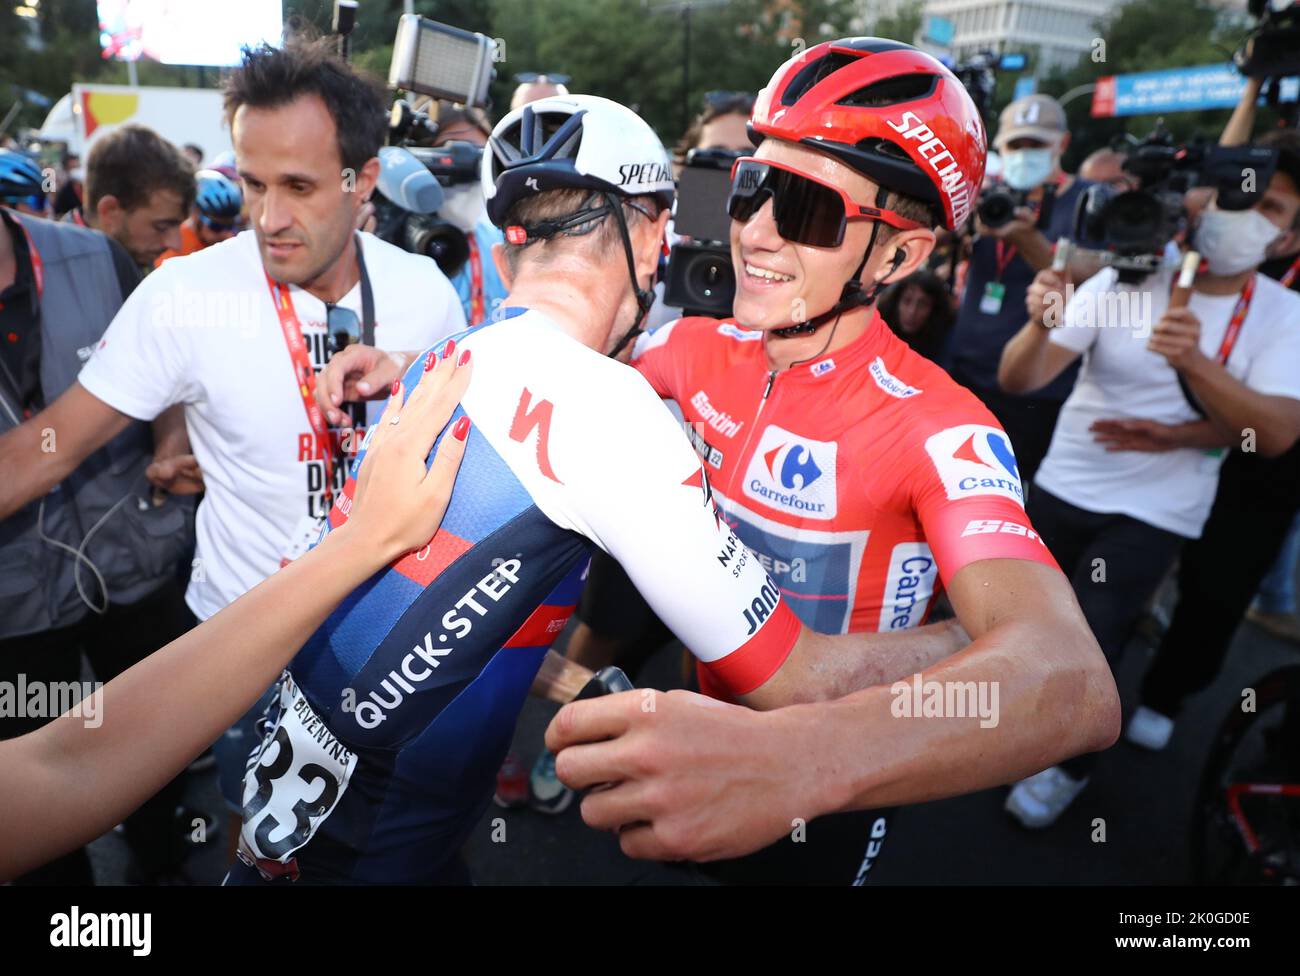 Belgian Remco Evenepoel of Quick-Step Alpha Vinyl celebrates after winning the 2022 edition of the 'Vuelta a Espana', Tour of Spain cycling race, in Madrid, Spain, Sunday 11 September 2022. BELGA PHOTO DAVID PINTENS Stock Photo